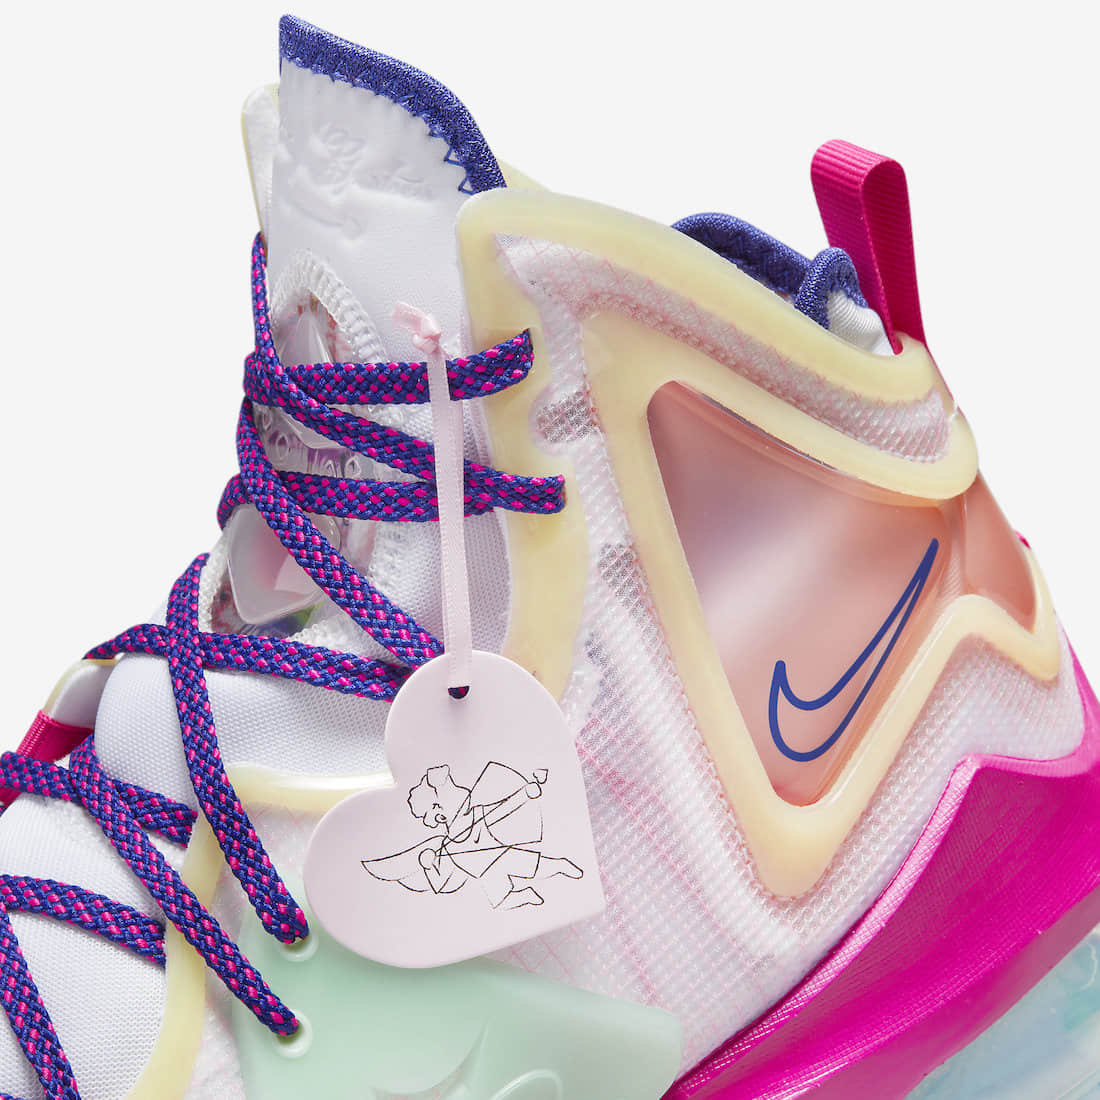 Nike LeBron 19 EP 'Valentine's Day' DH8460-900 | Limited Edition Basketball Shoes